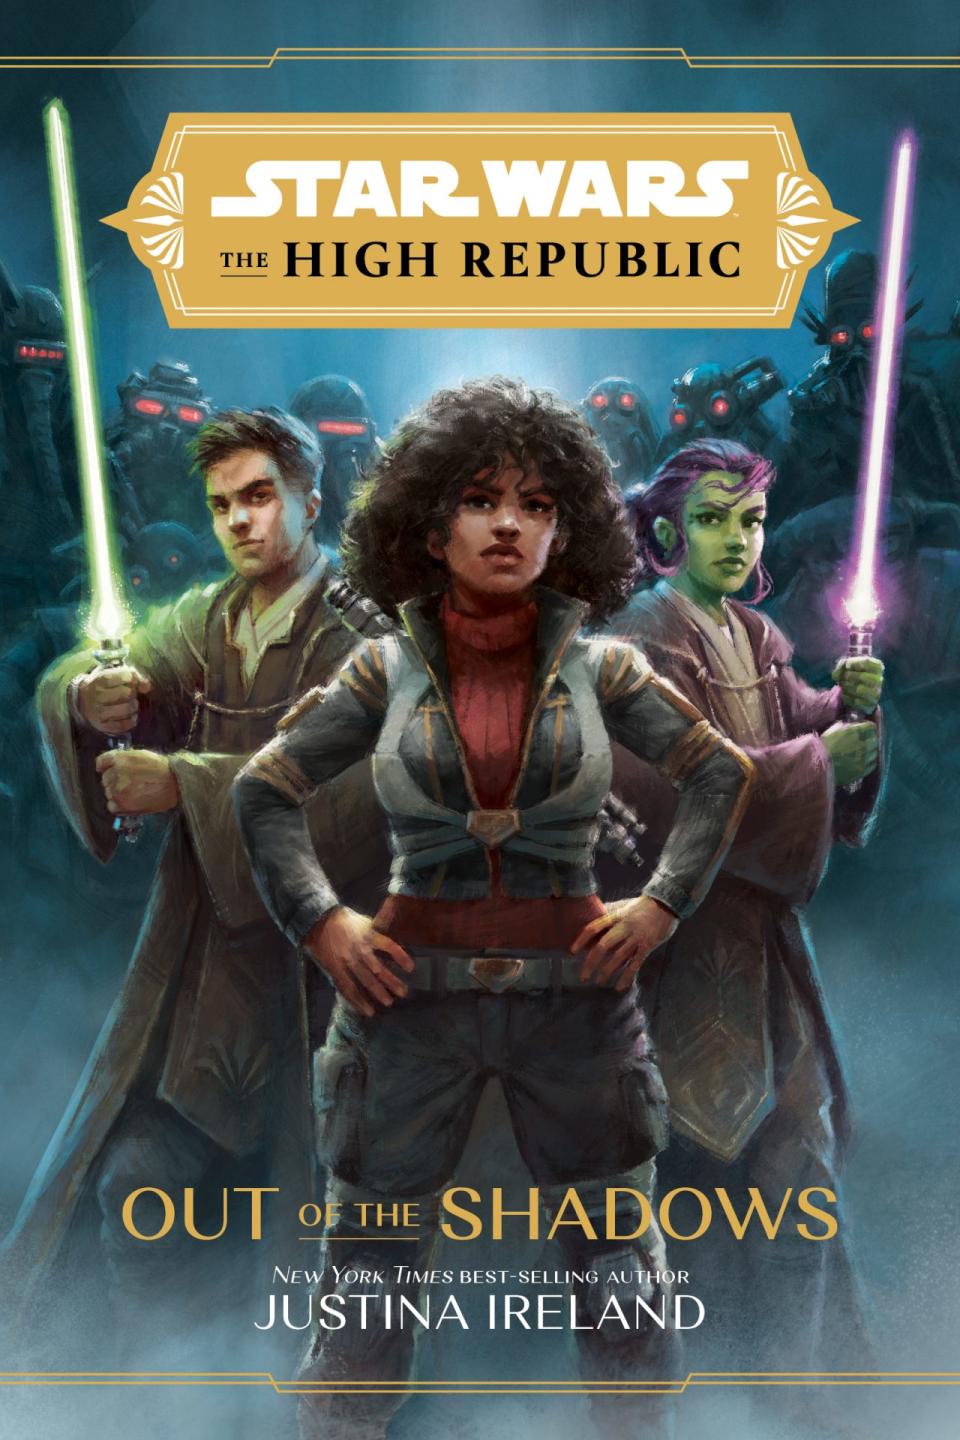 The illustrated cover of Star Wars: The High Republic Out of the Shadows depicting a human and alien holding lightsabers on either side of a young Black woman